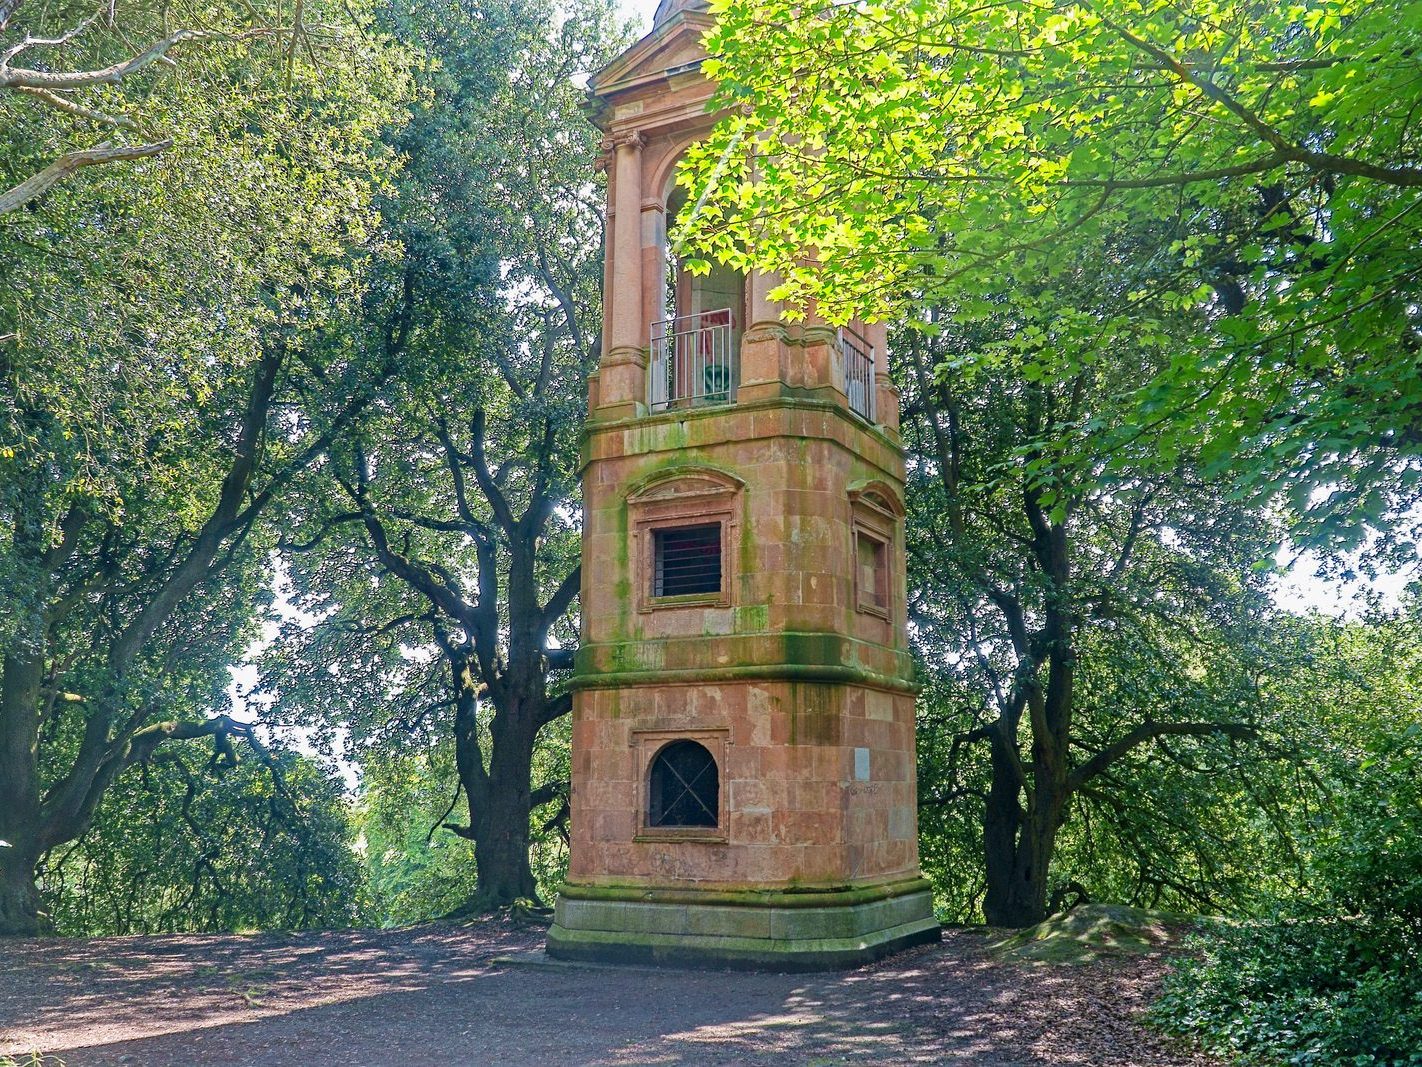 ROMAN TOWER ONE OF MANY FOLLIES AT ST ANNE'S PARK [TOMB OF JULII]-224689-1